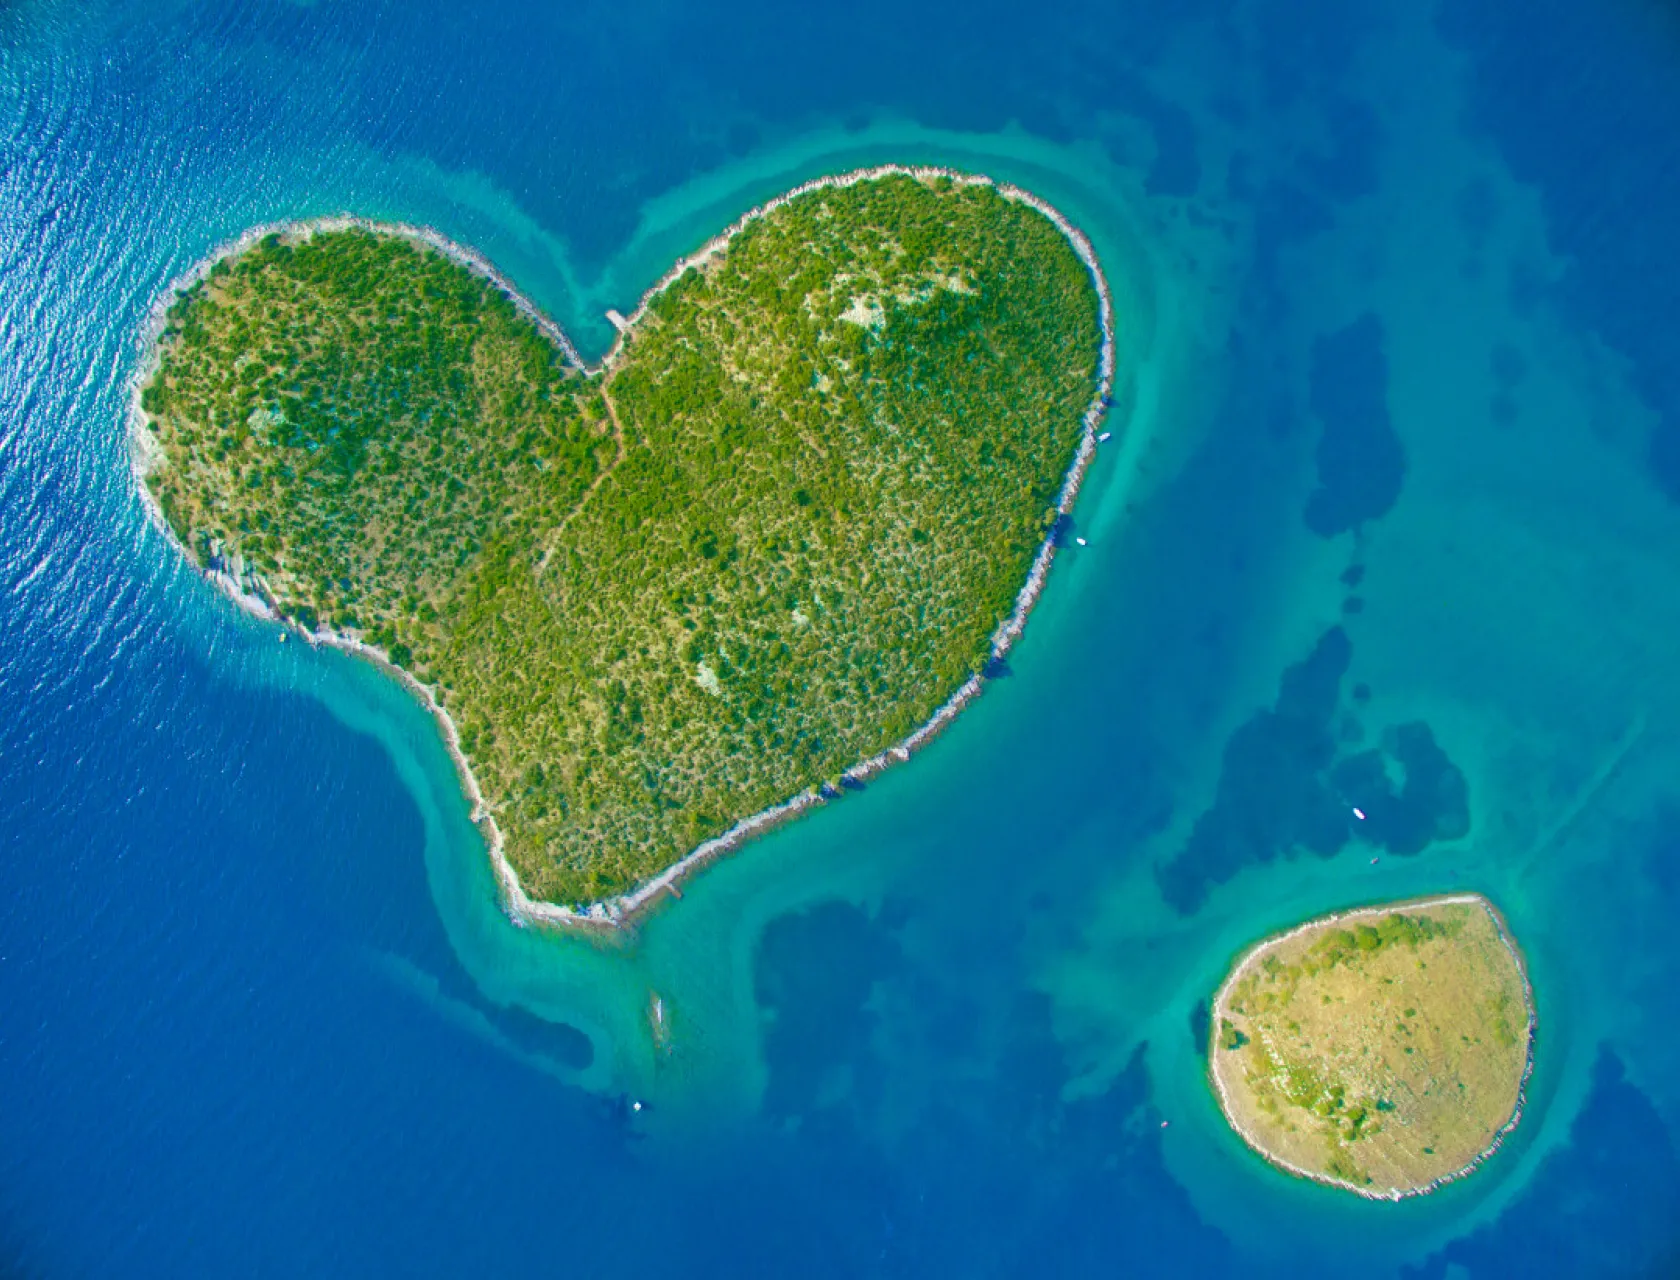 Aerial view of the heart shaped Galesnjak island on the adriatic coast of Croatia